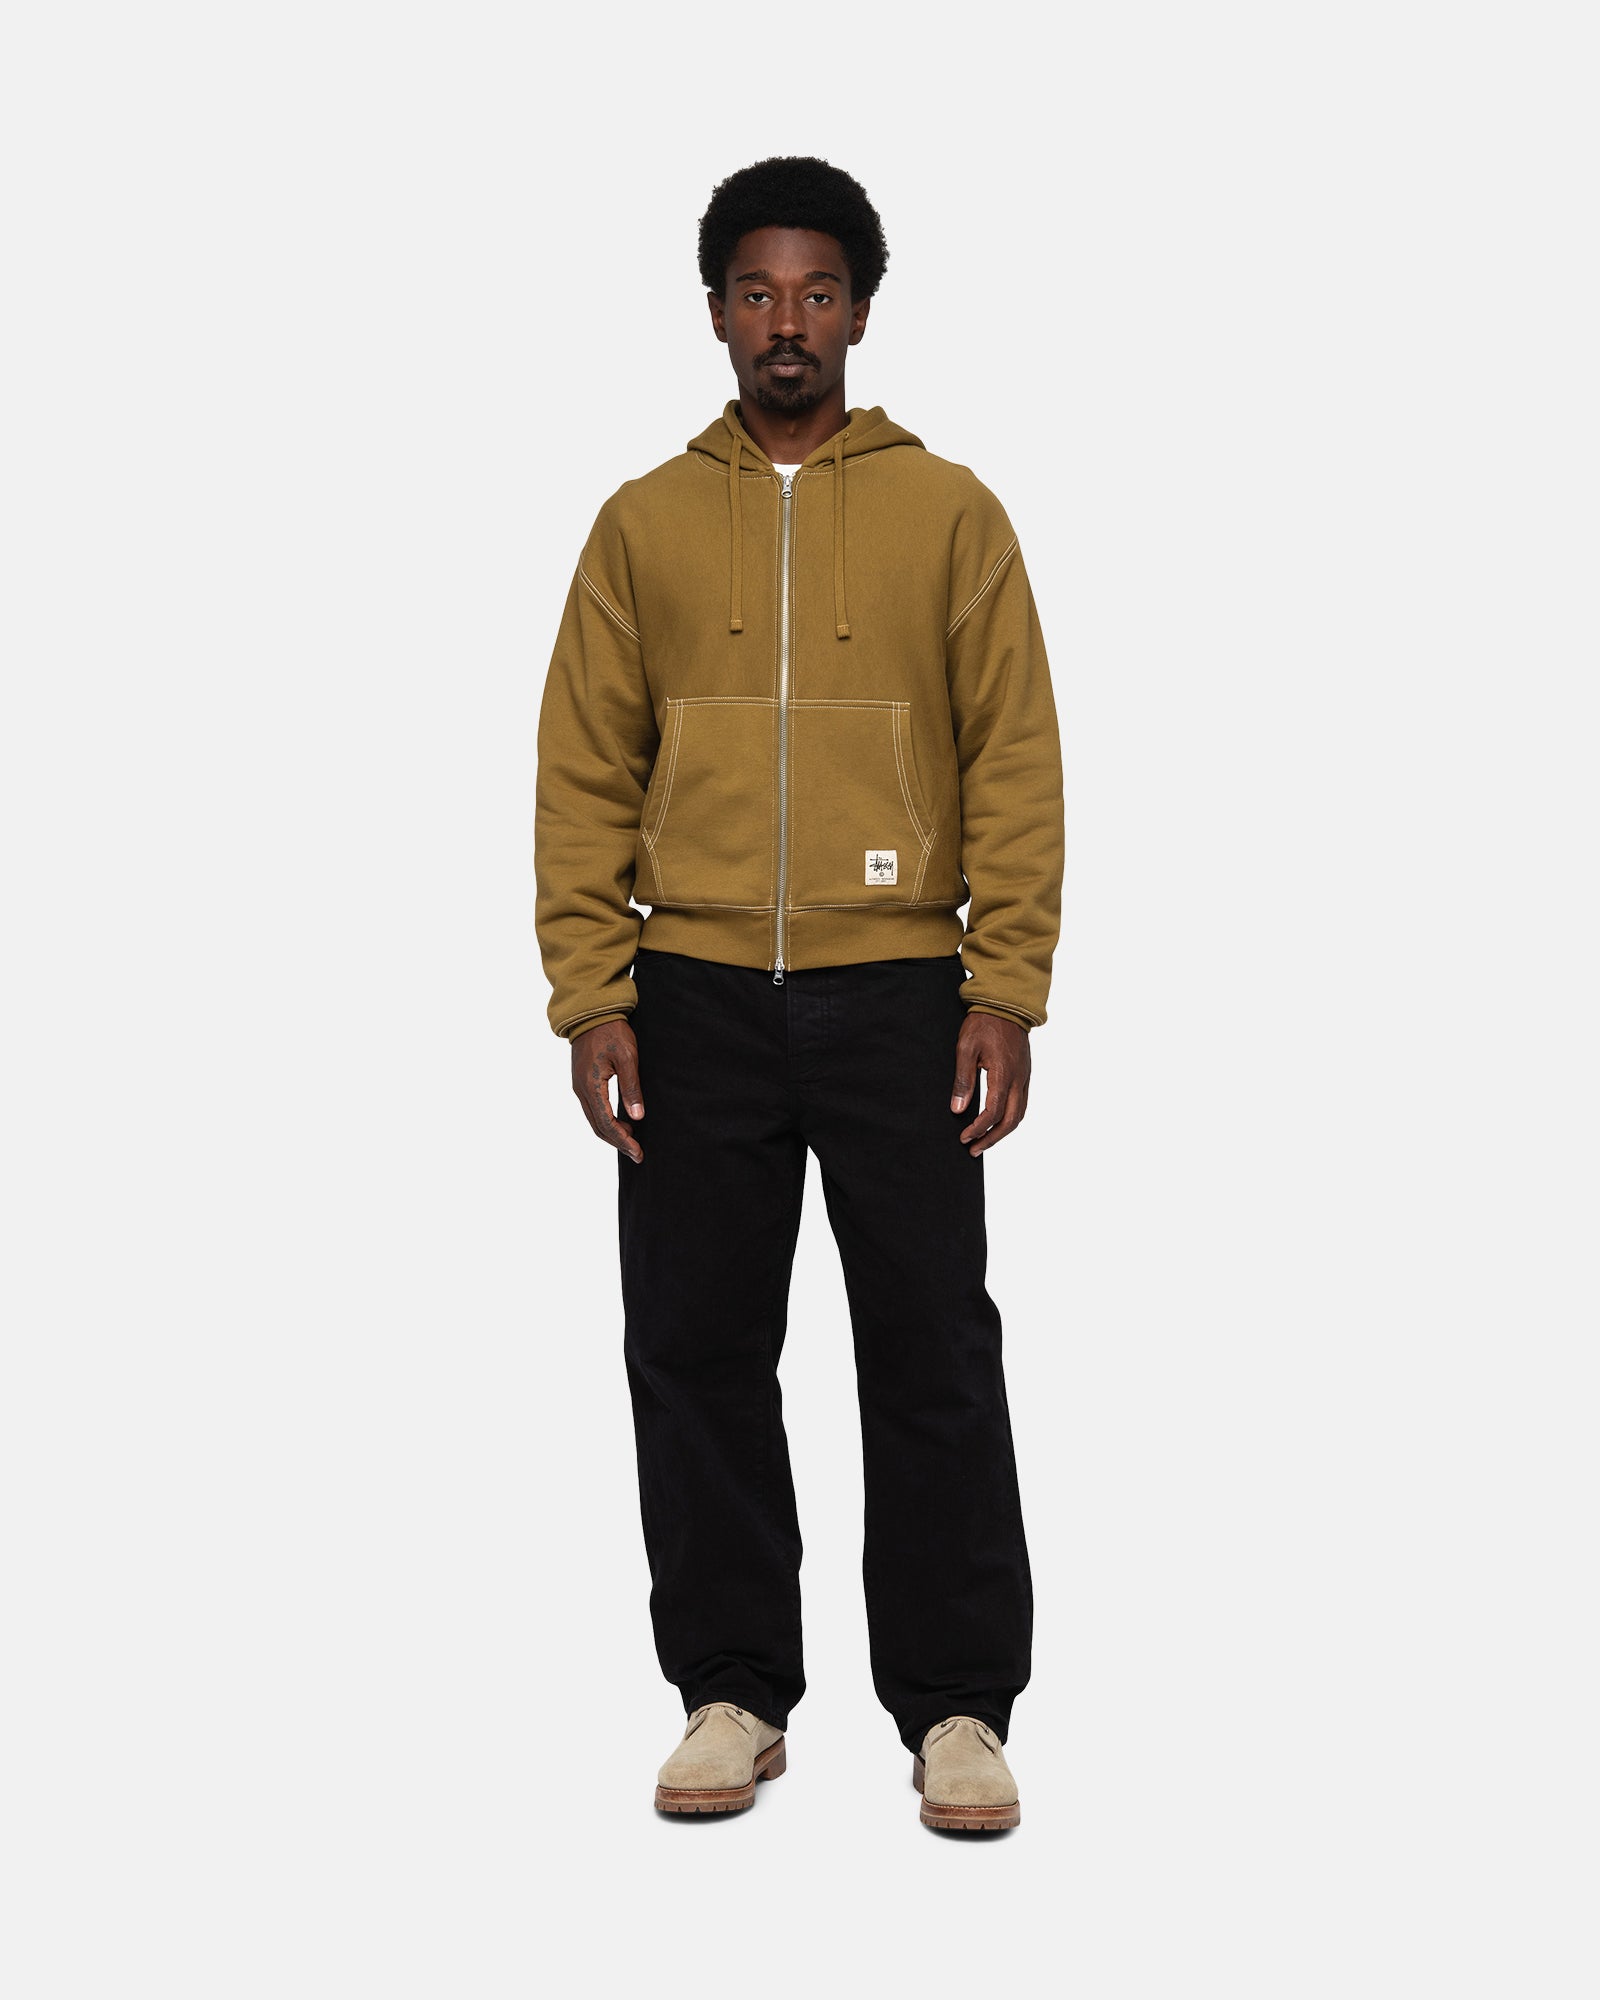 Stussy Double Face Label Zip Hoodie着丈身幅教えて頂けますか